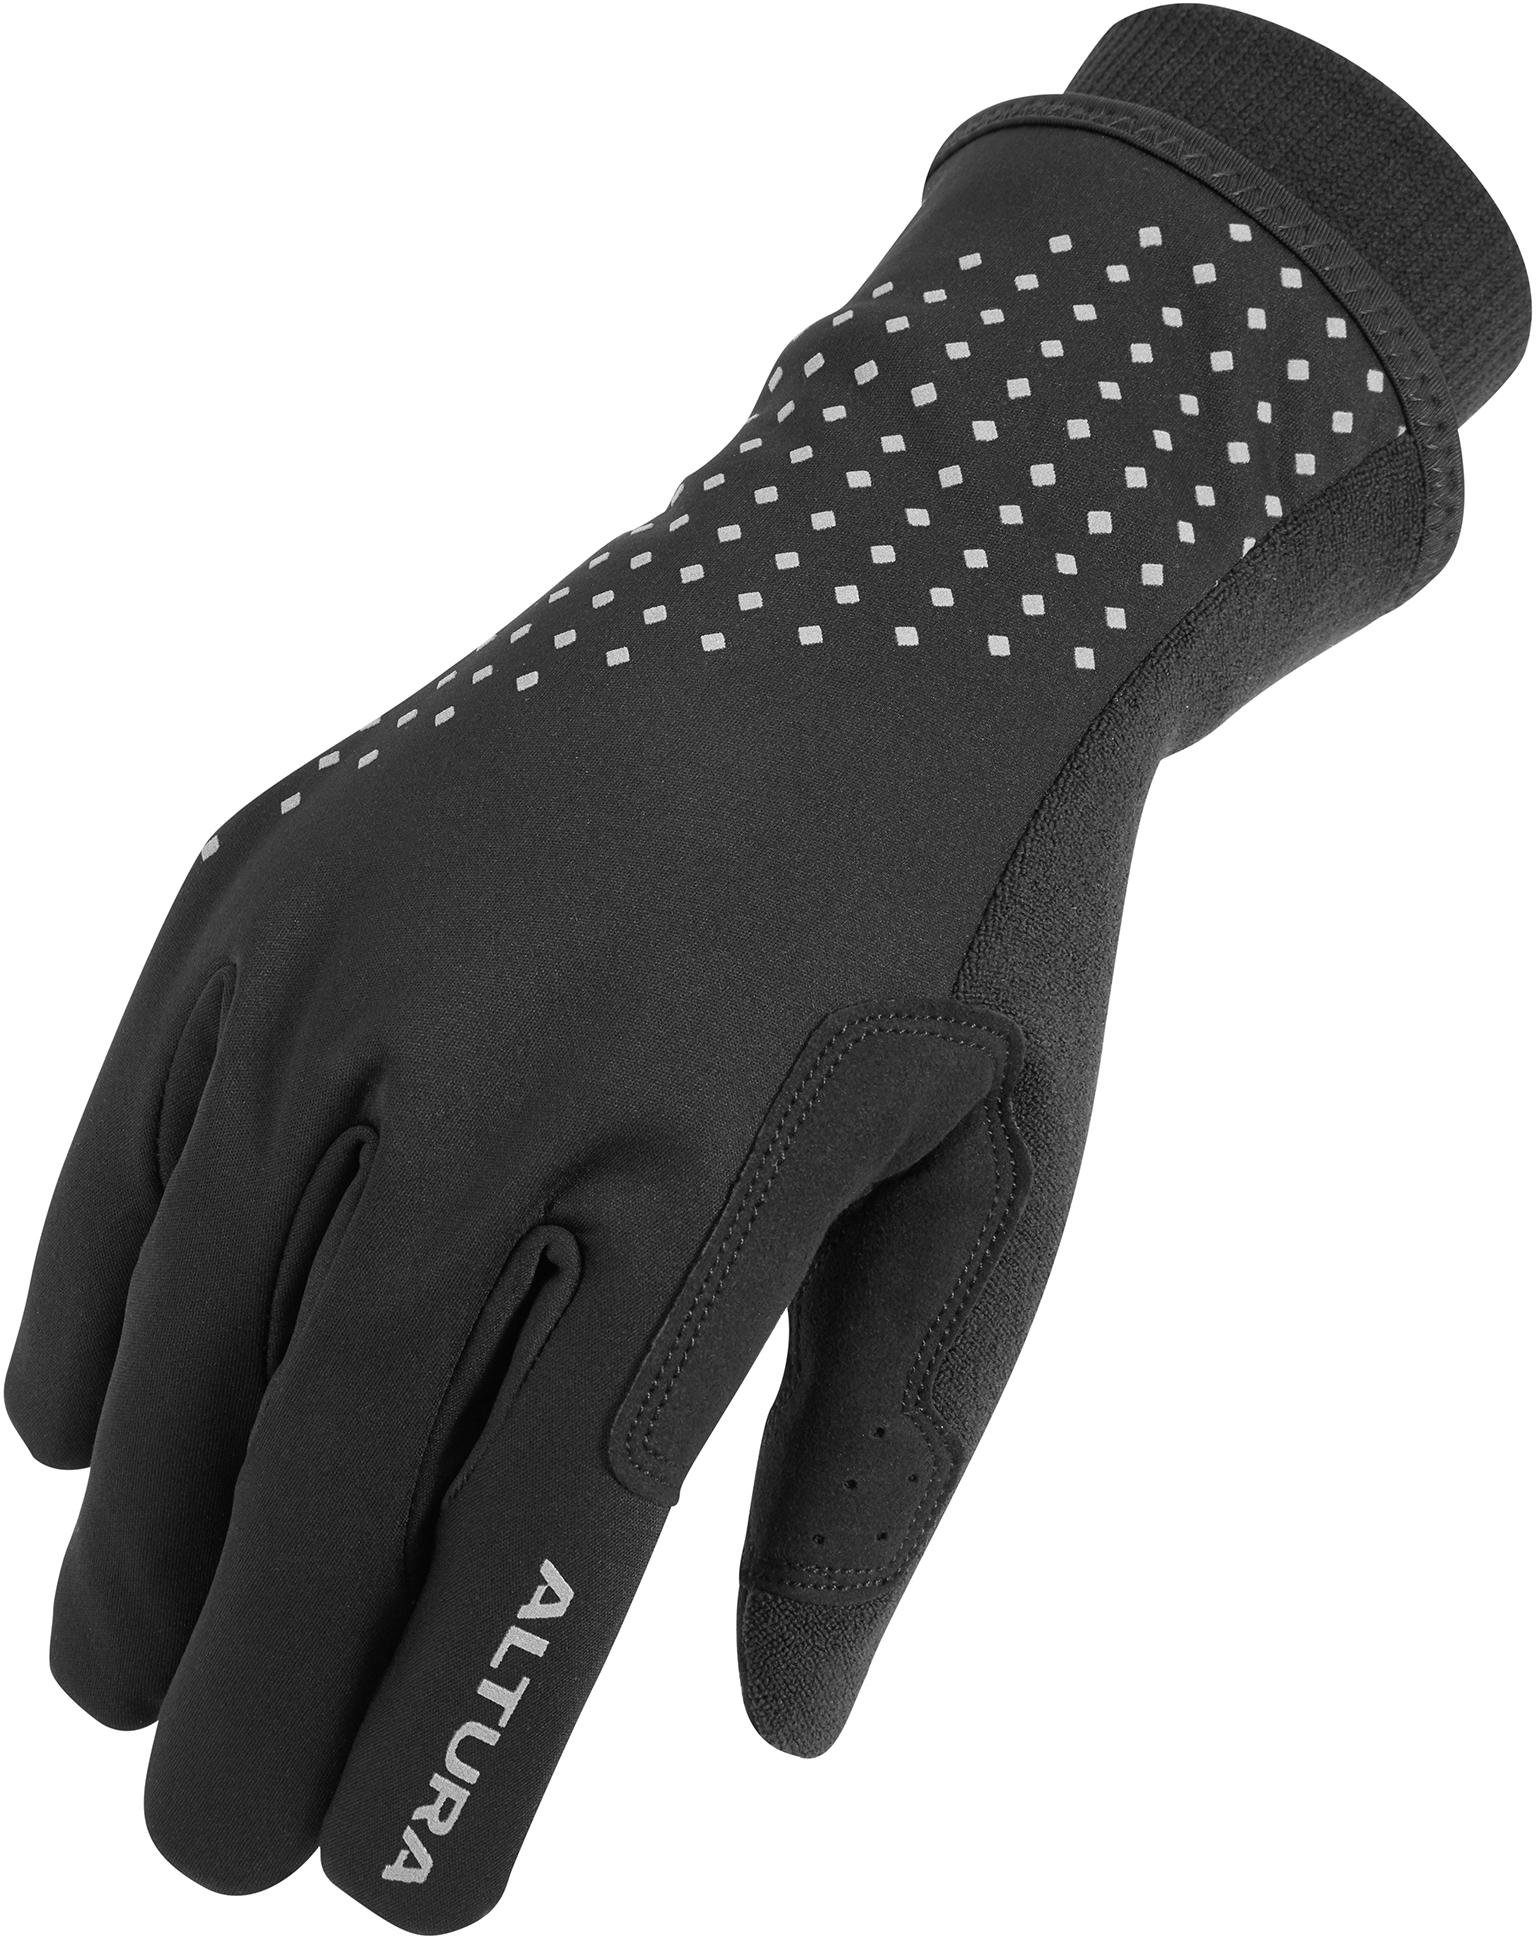 Altura Nightvision Insulated Waterproof Gloves - Black